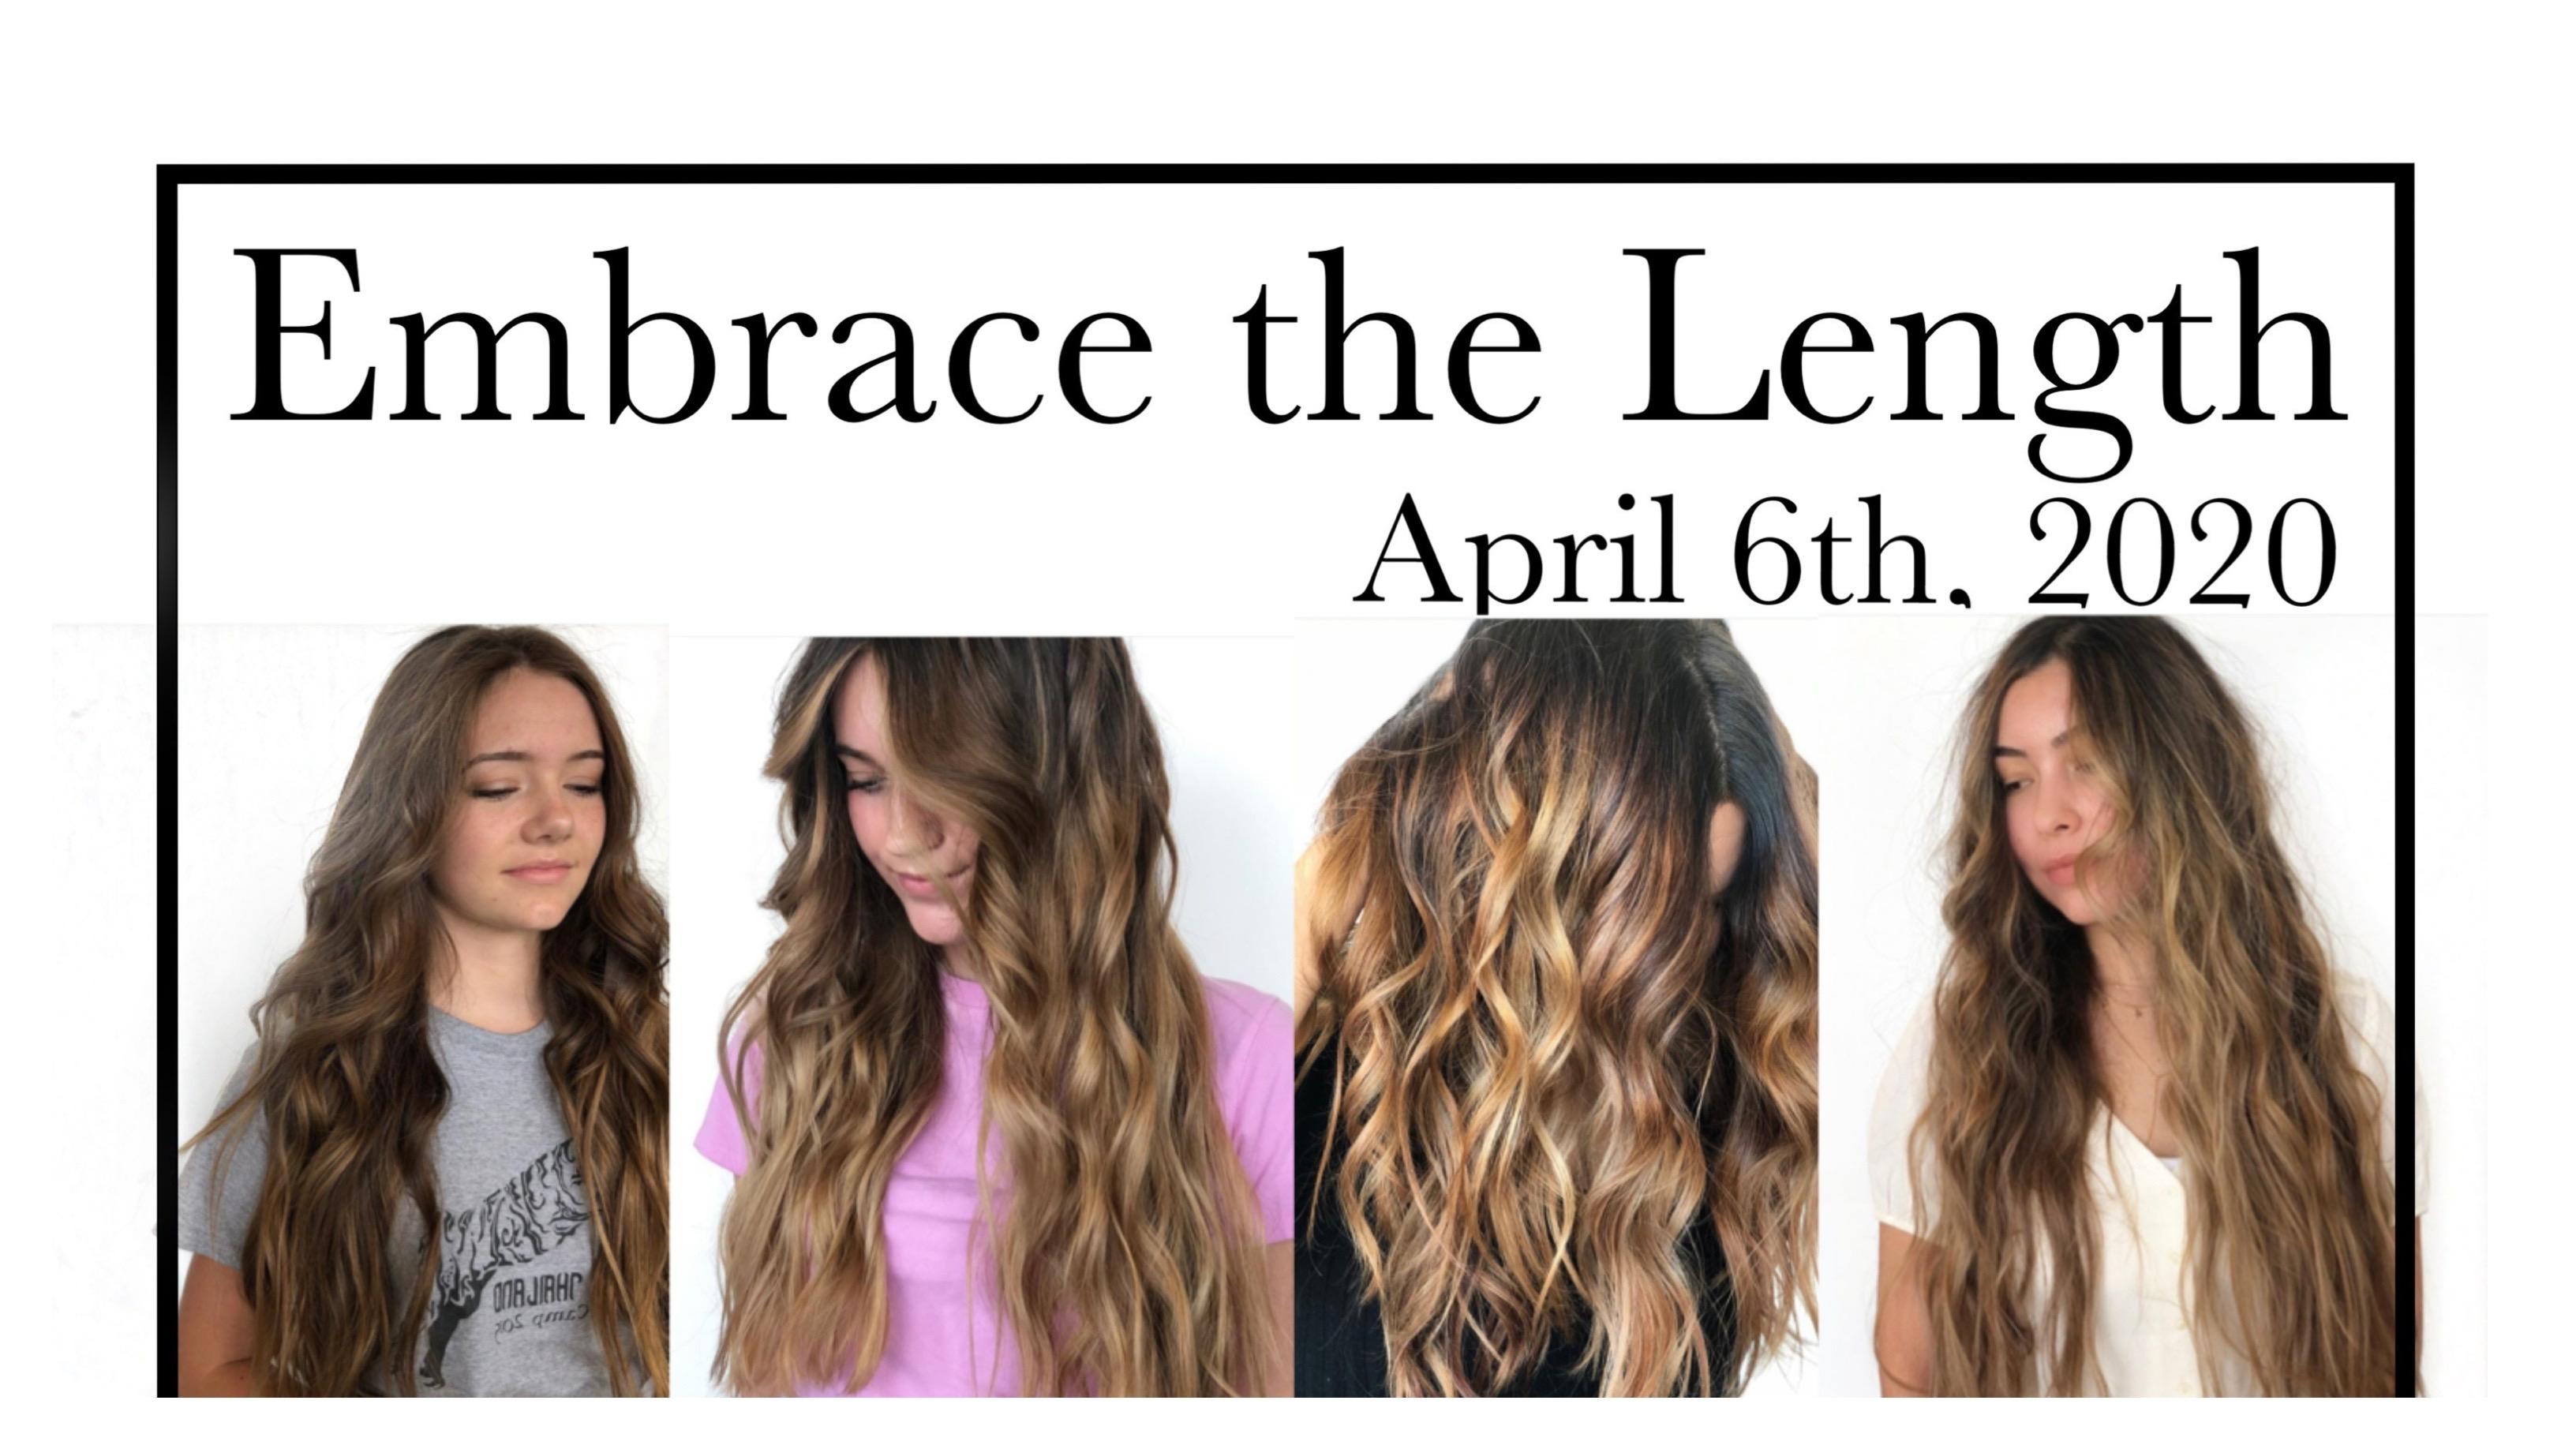 Embrace the length! A balayage and long layer look and learn class